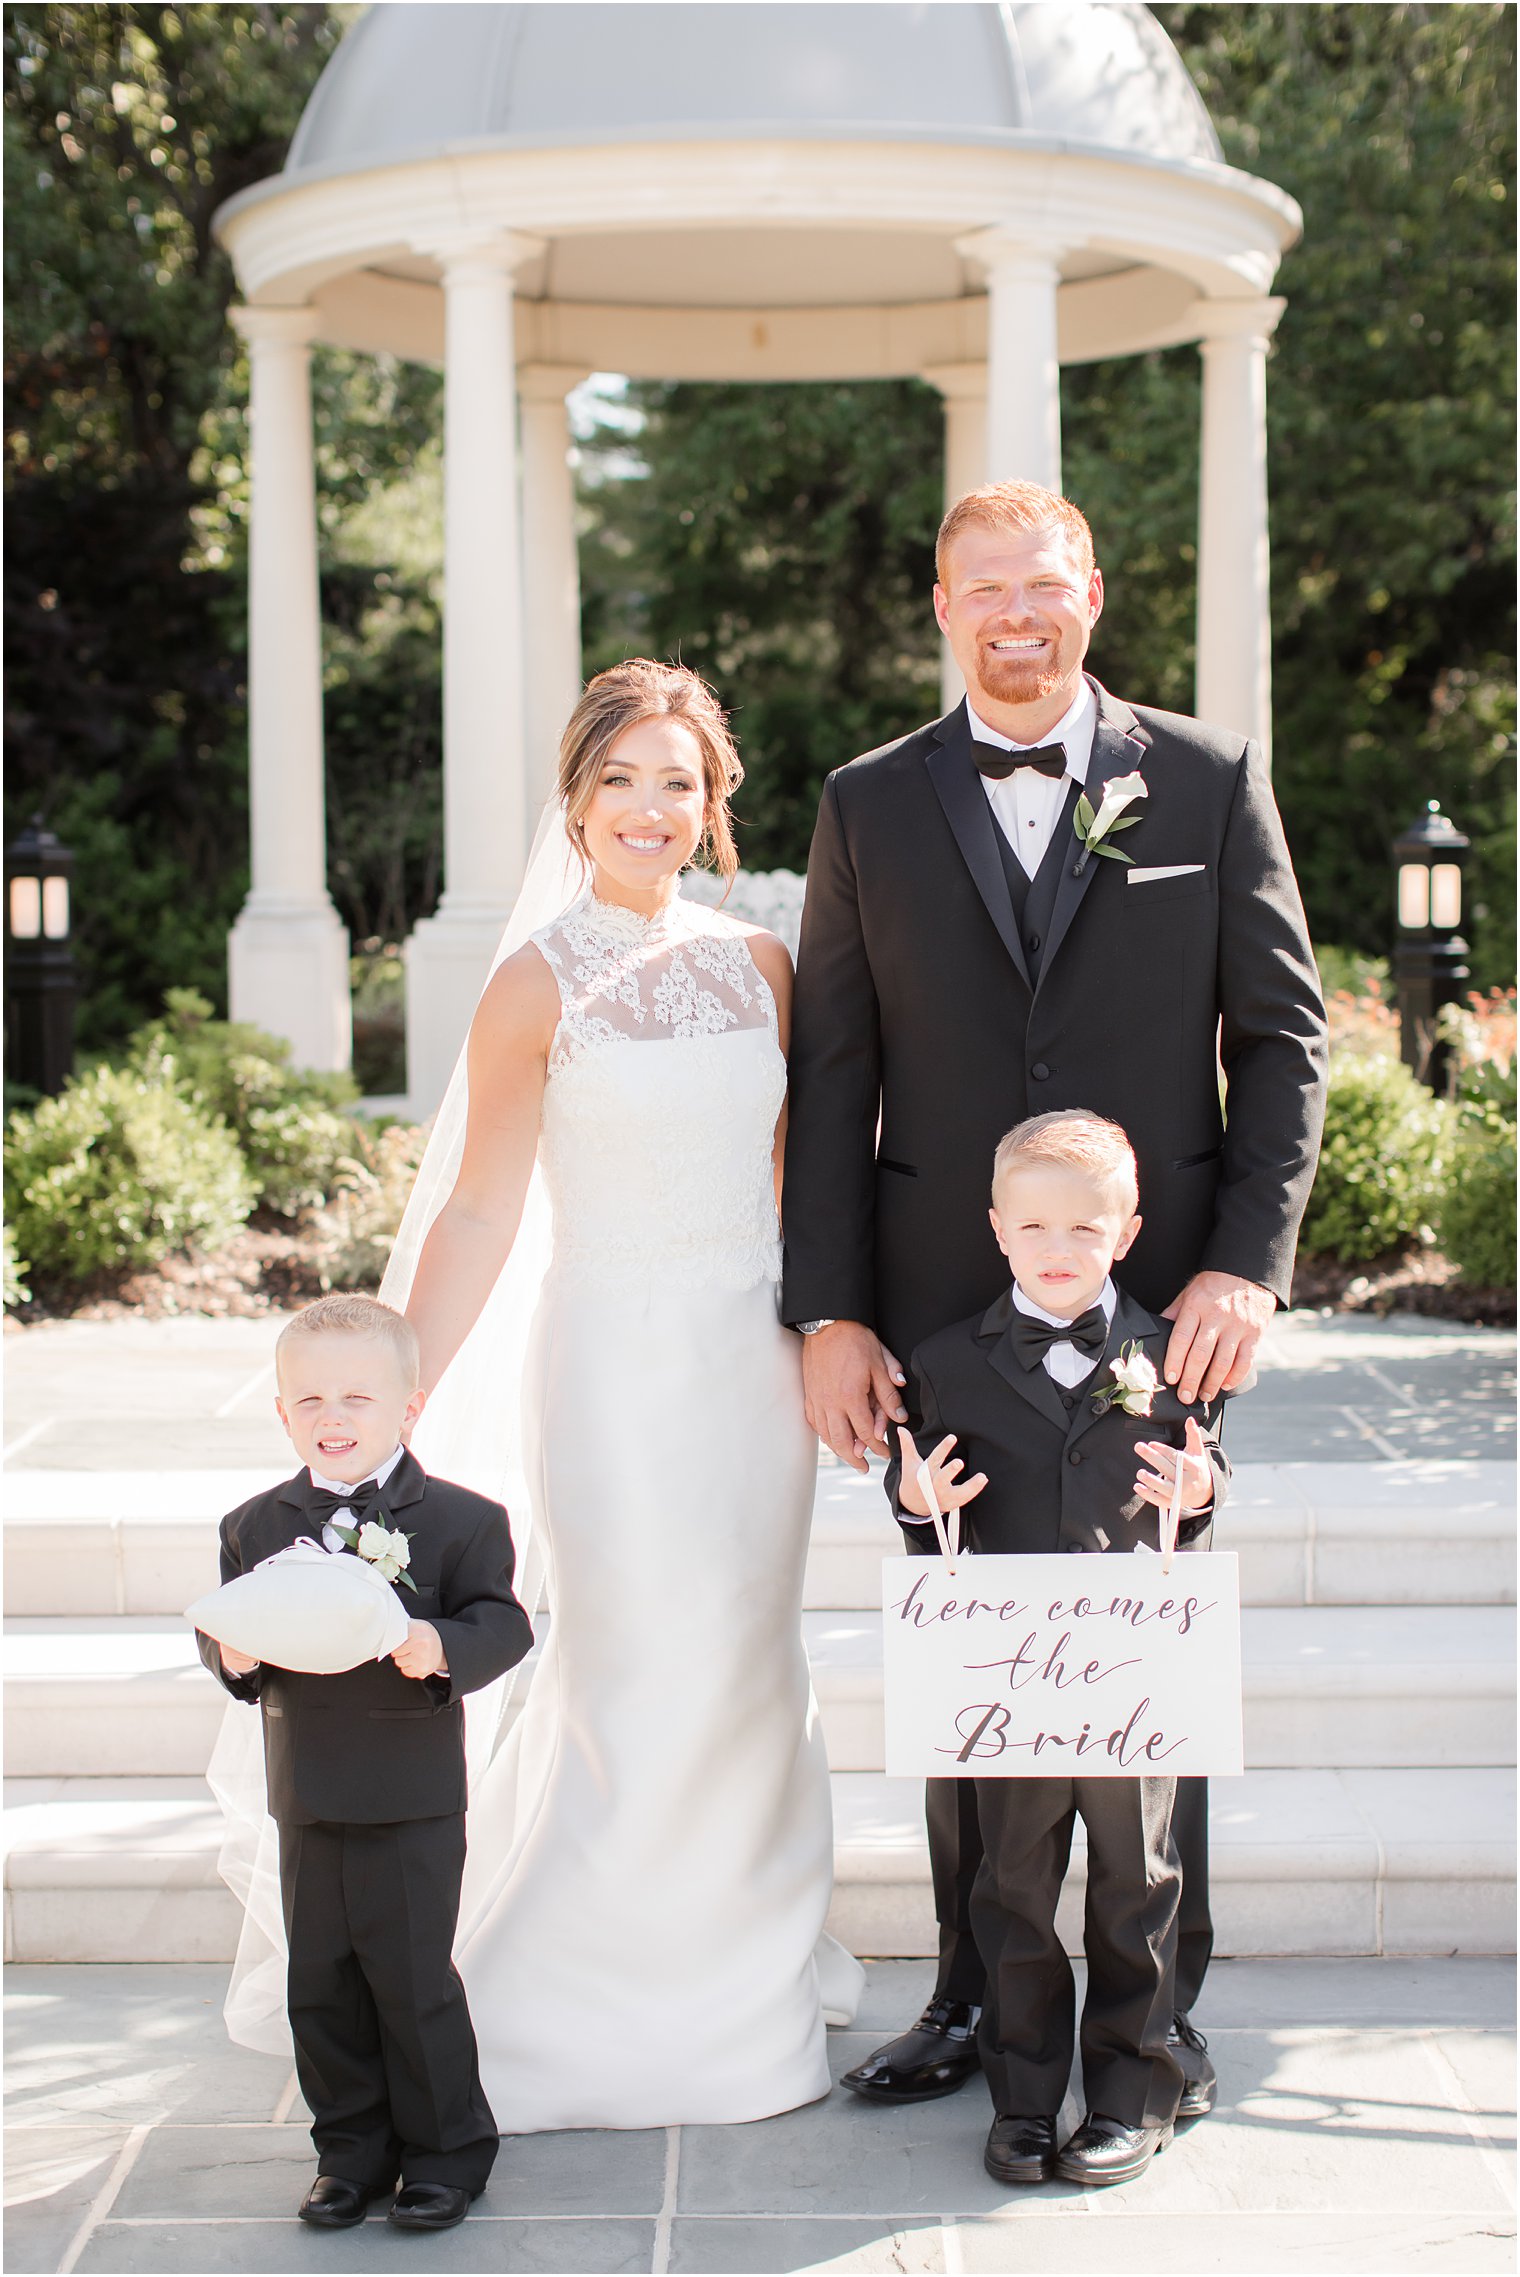 Formal photo of bride and groom with ring bearers